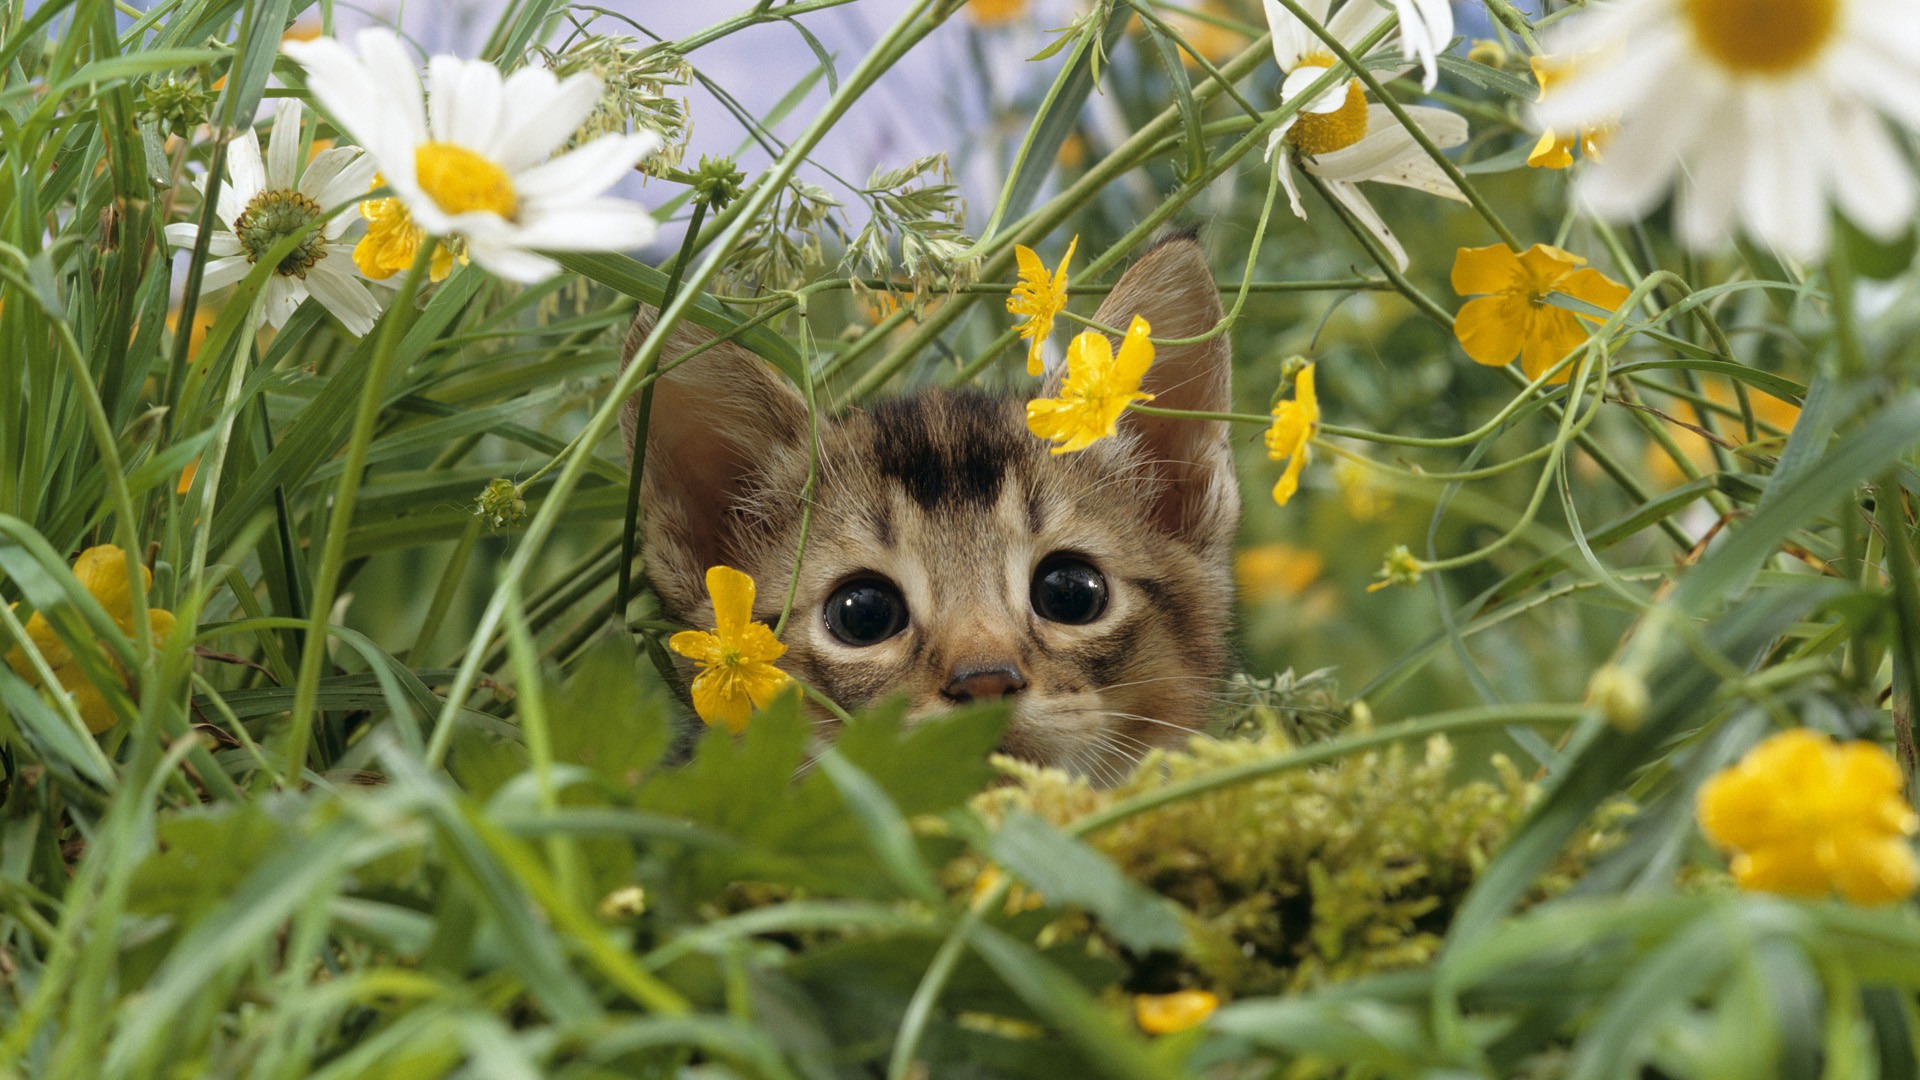 Cat Lost in Grass for 1920 x 1080 HDTV 1080p resolution